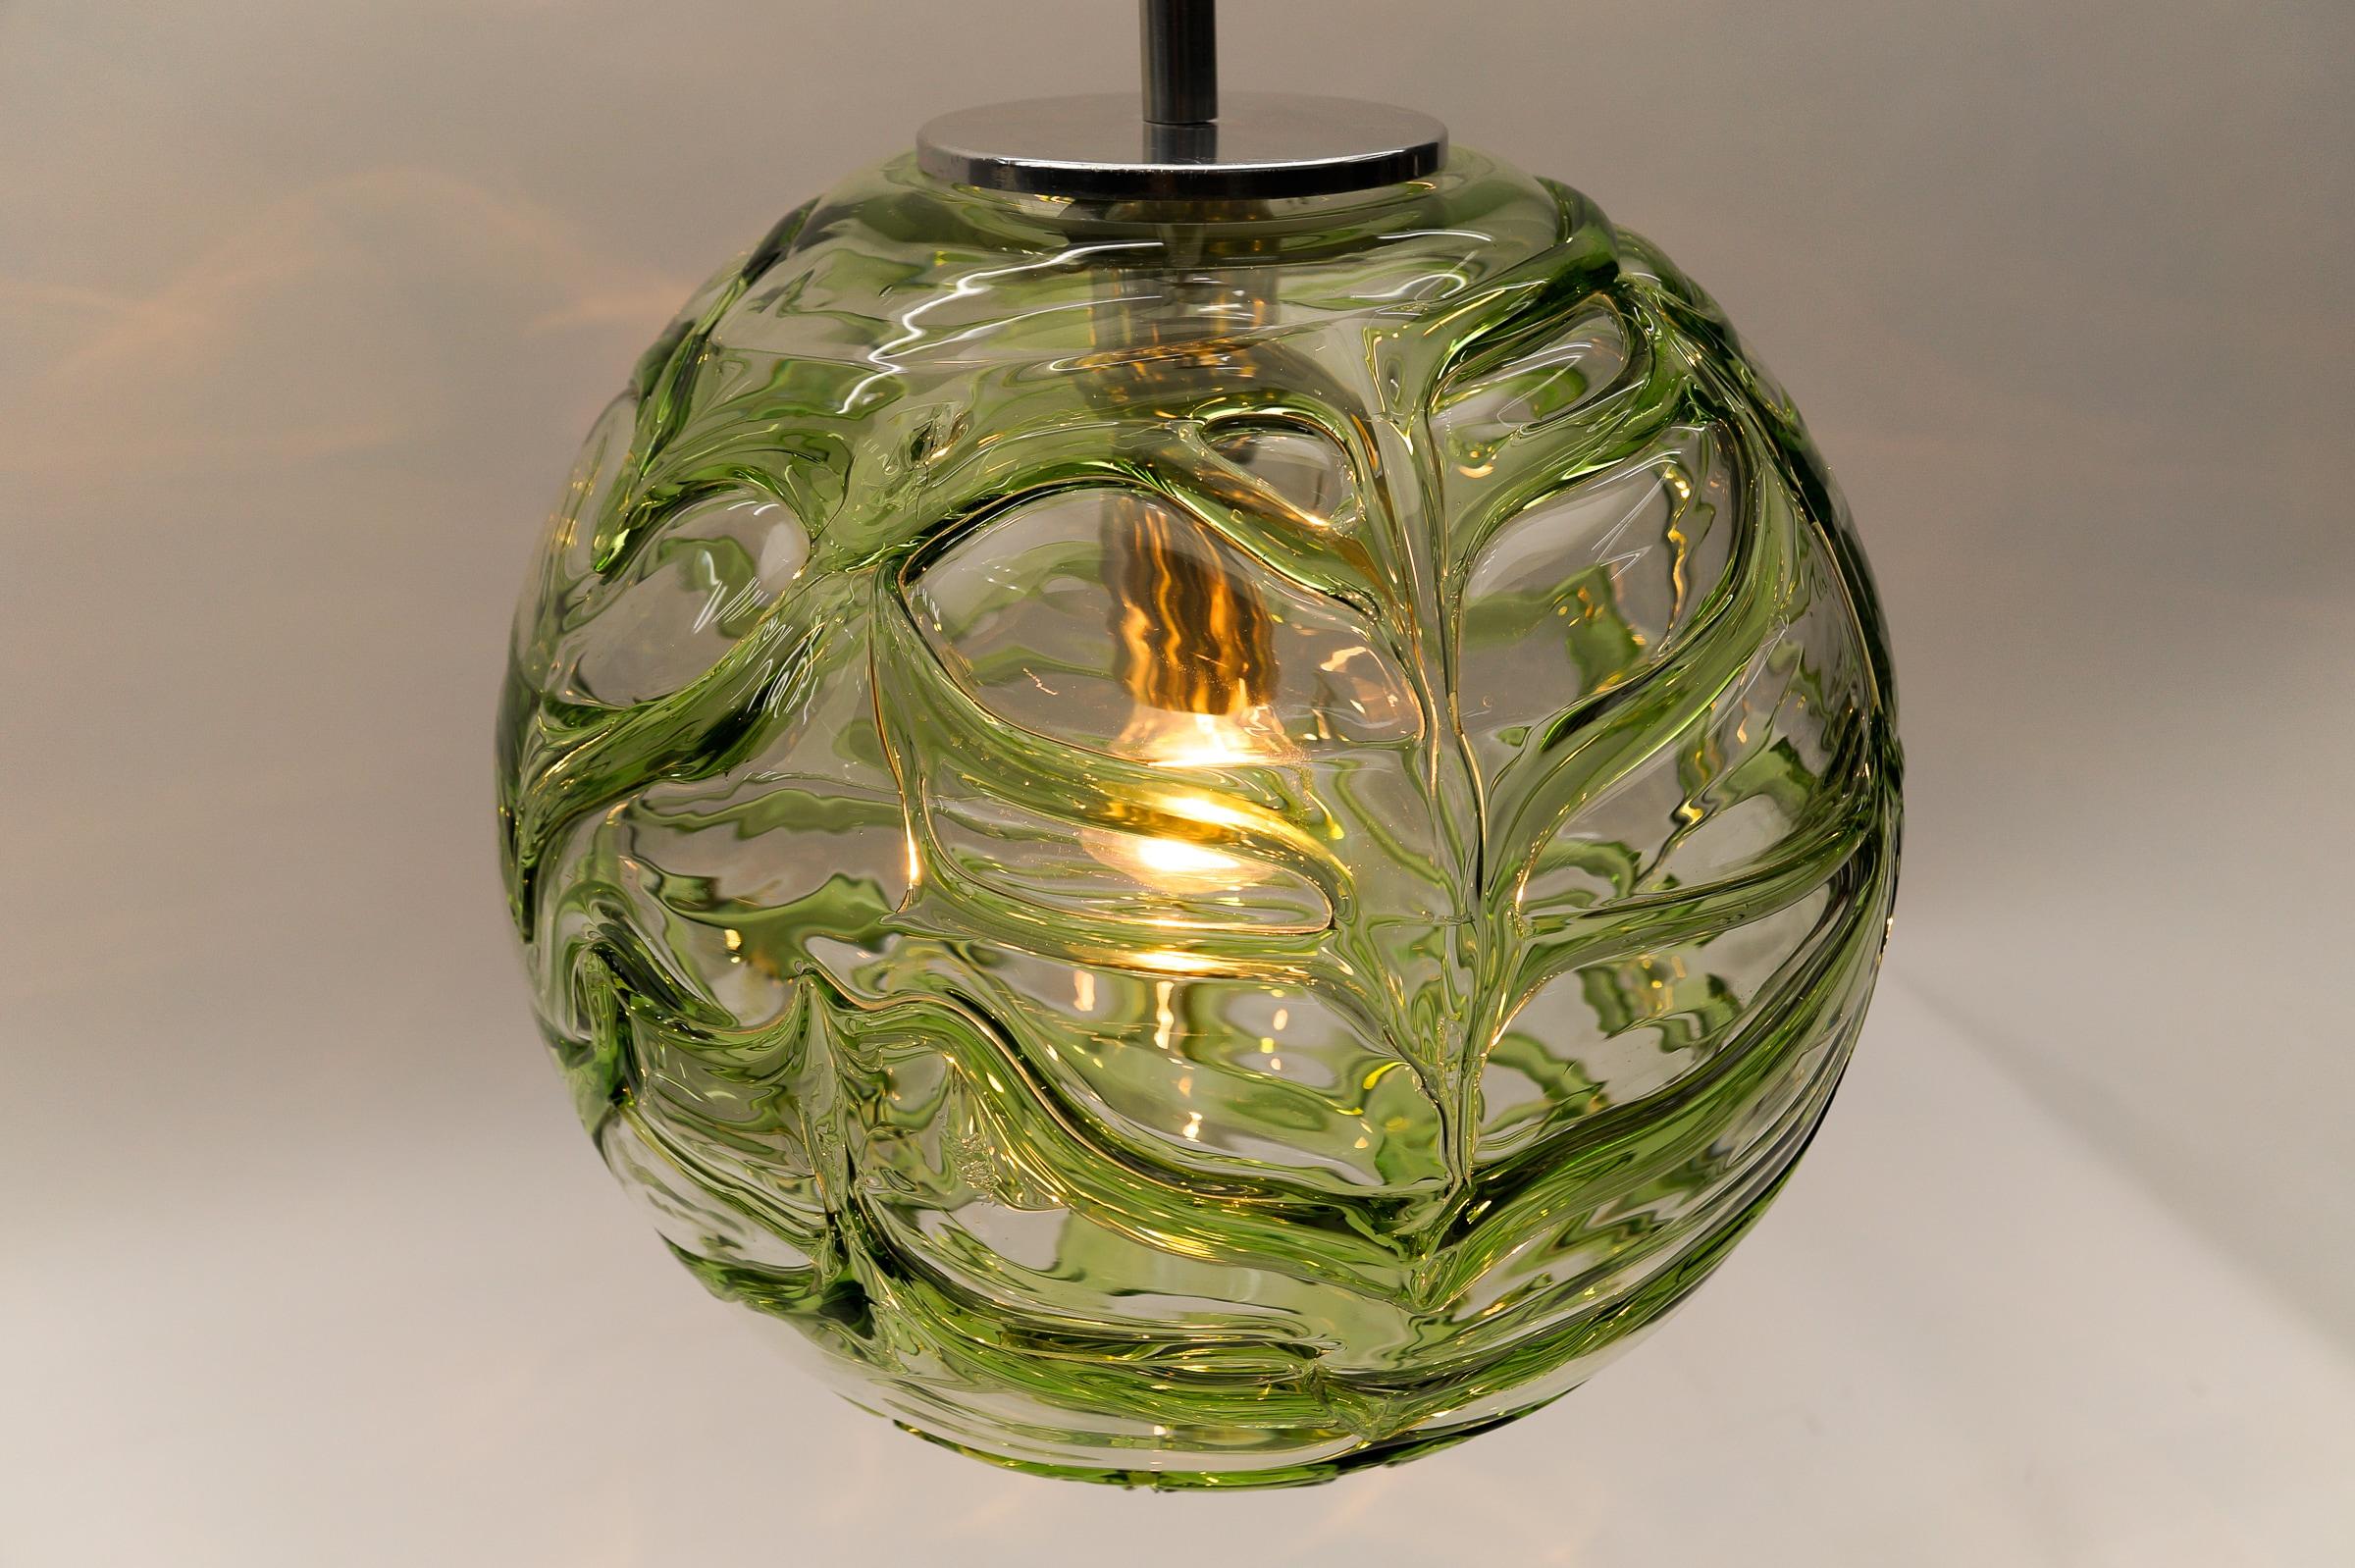 Large Green Murano Glass Ball Pendant Lamp by Doria, - 1960s Germany For Sale 6